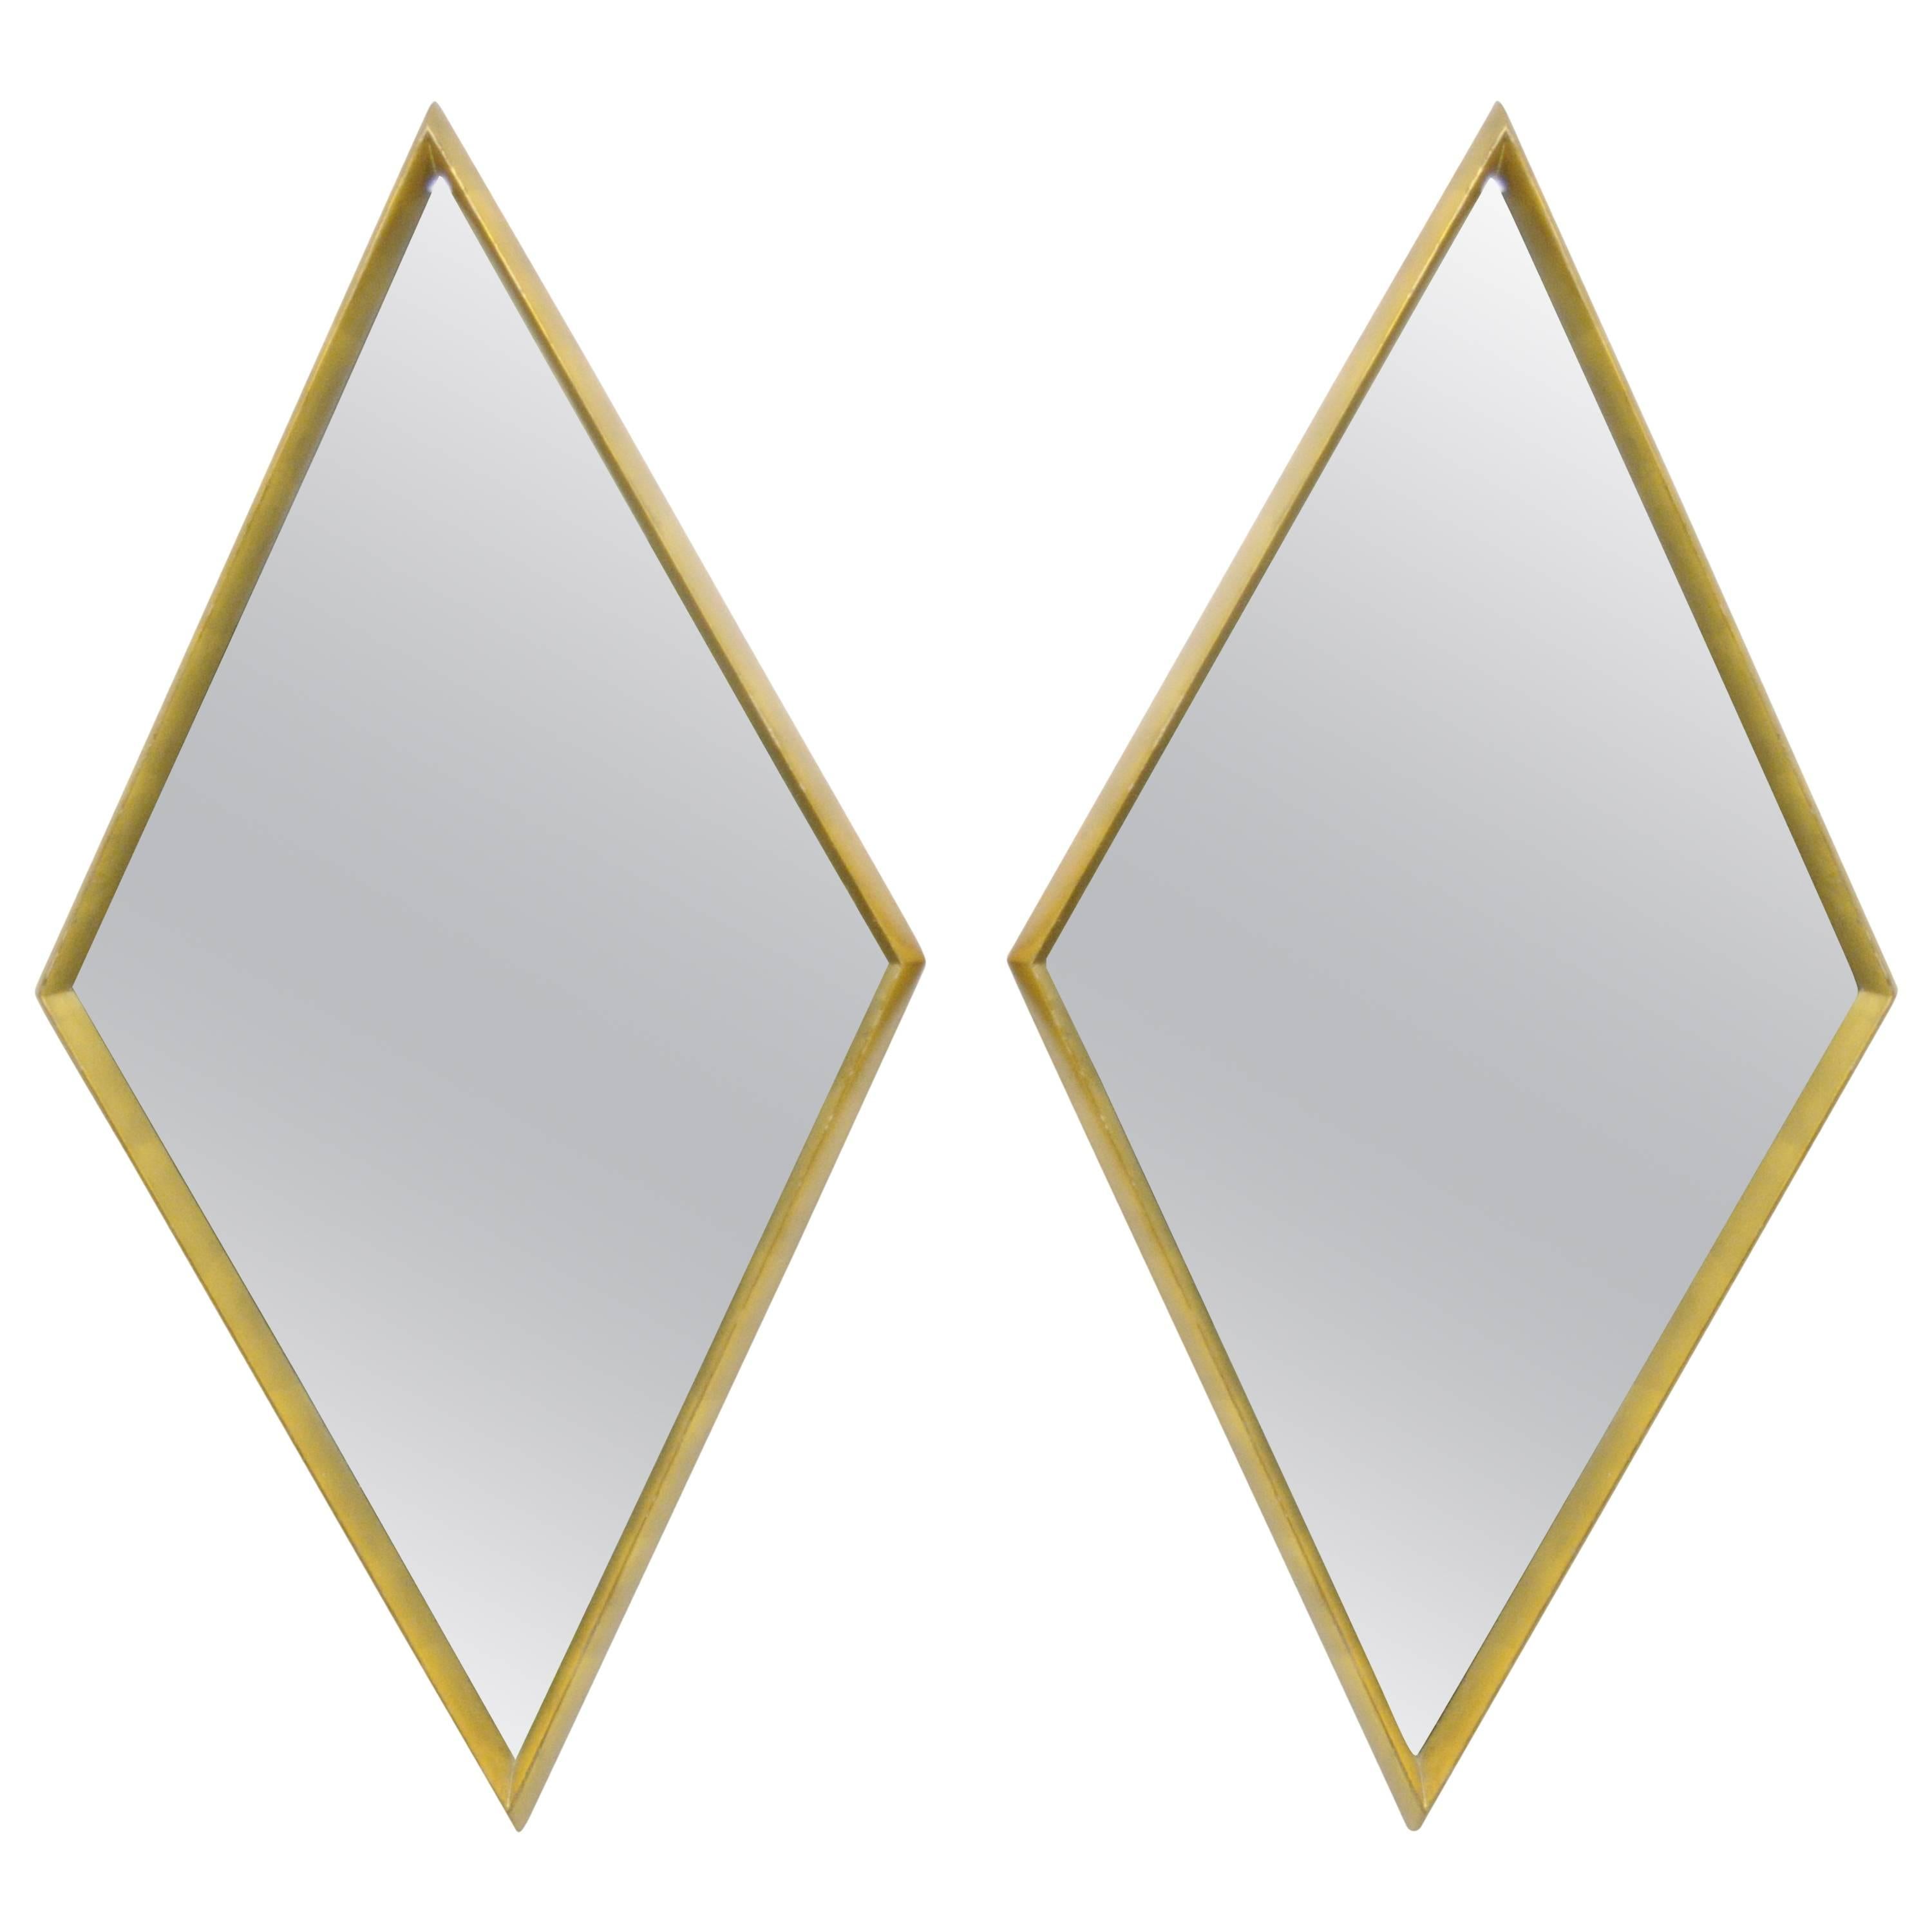 Pair of Diamond Shaped Deep Wood Frame Gold Leaf Wall Mirrors Attrib. to Labarge